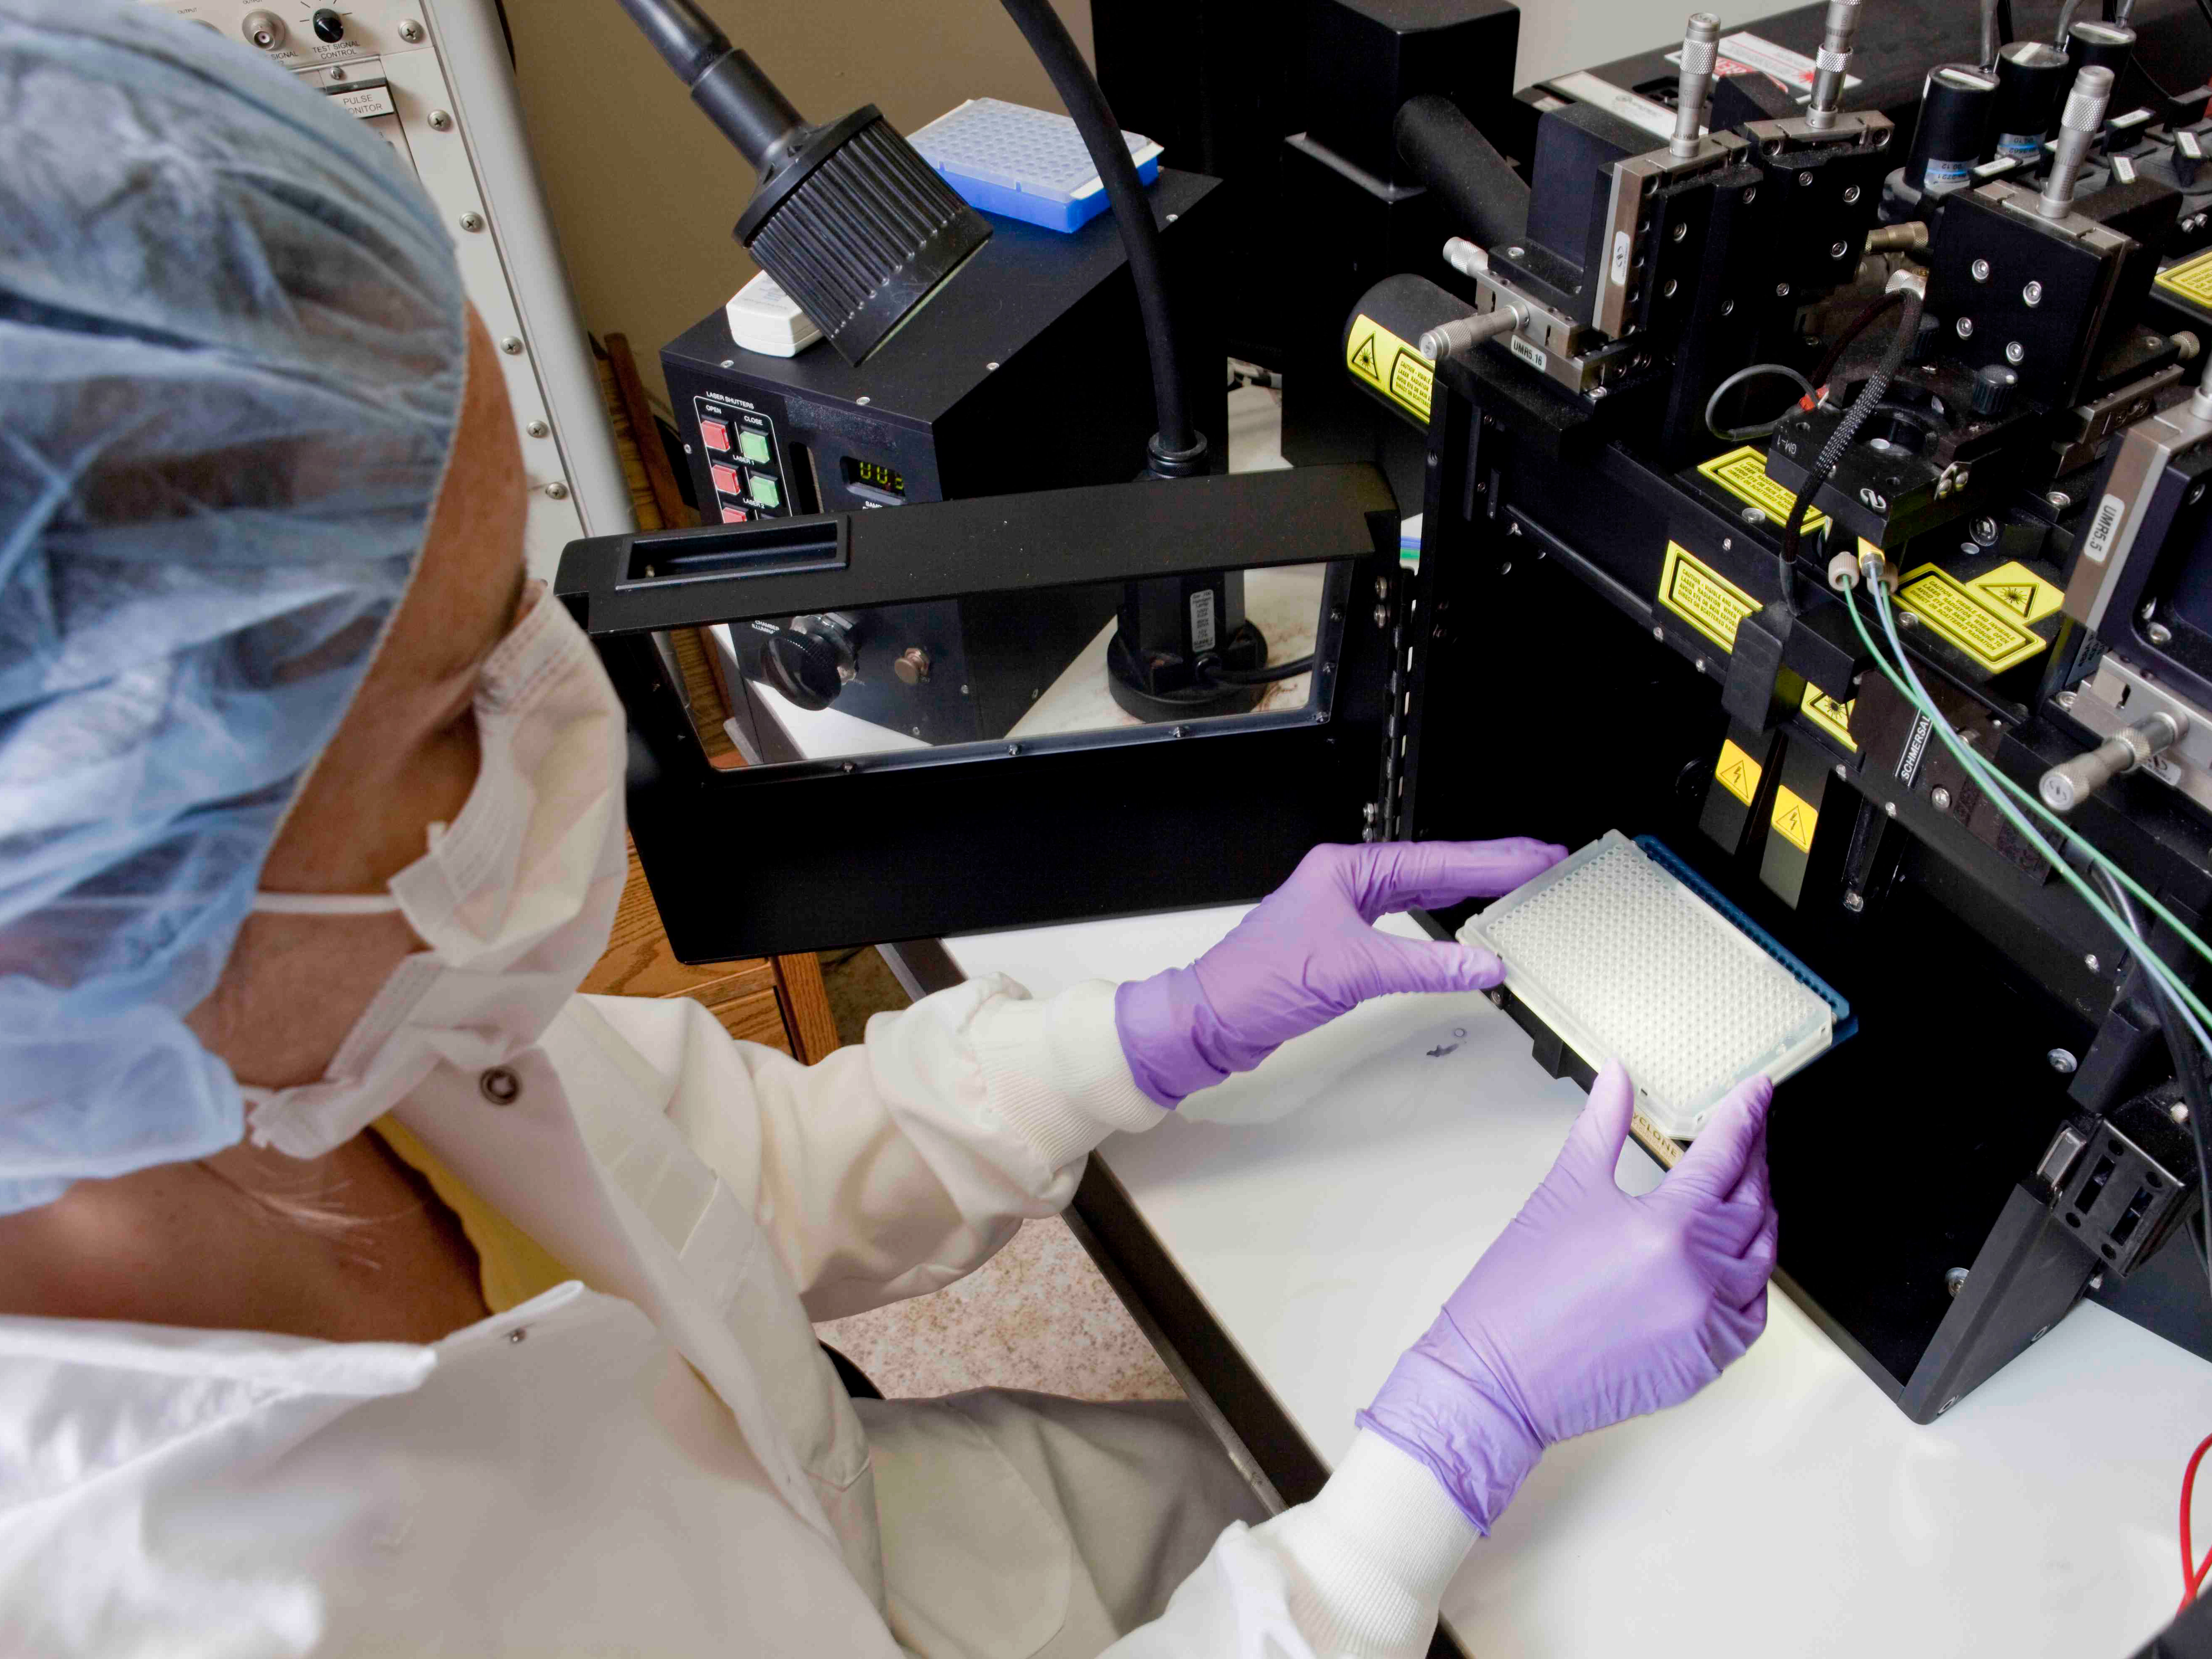 Scientist loads material for analysis into an instrument